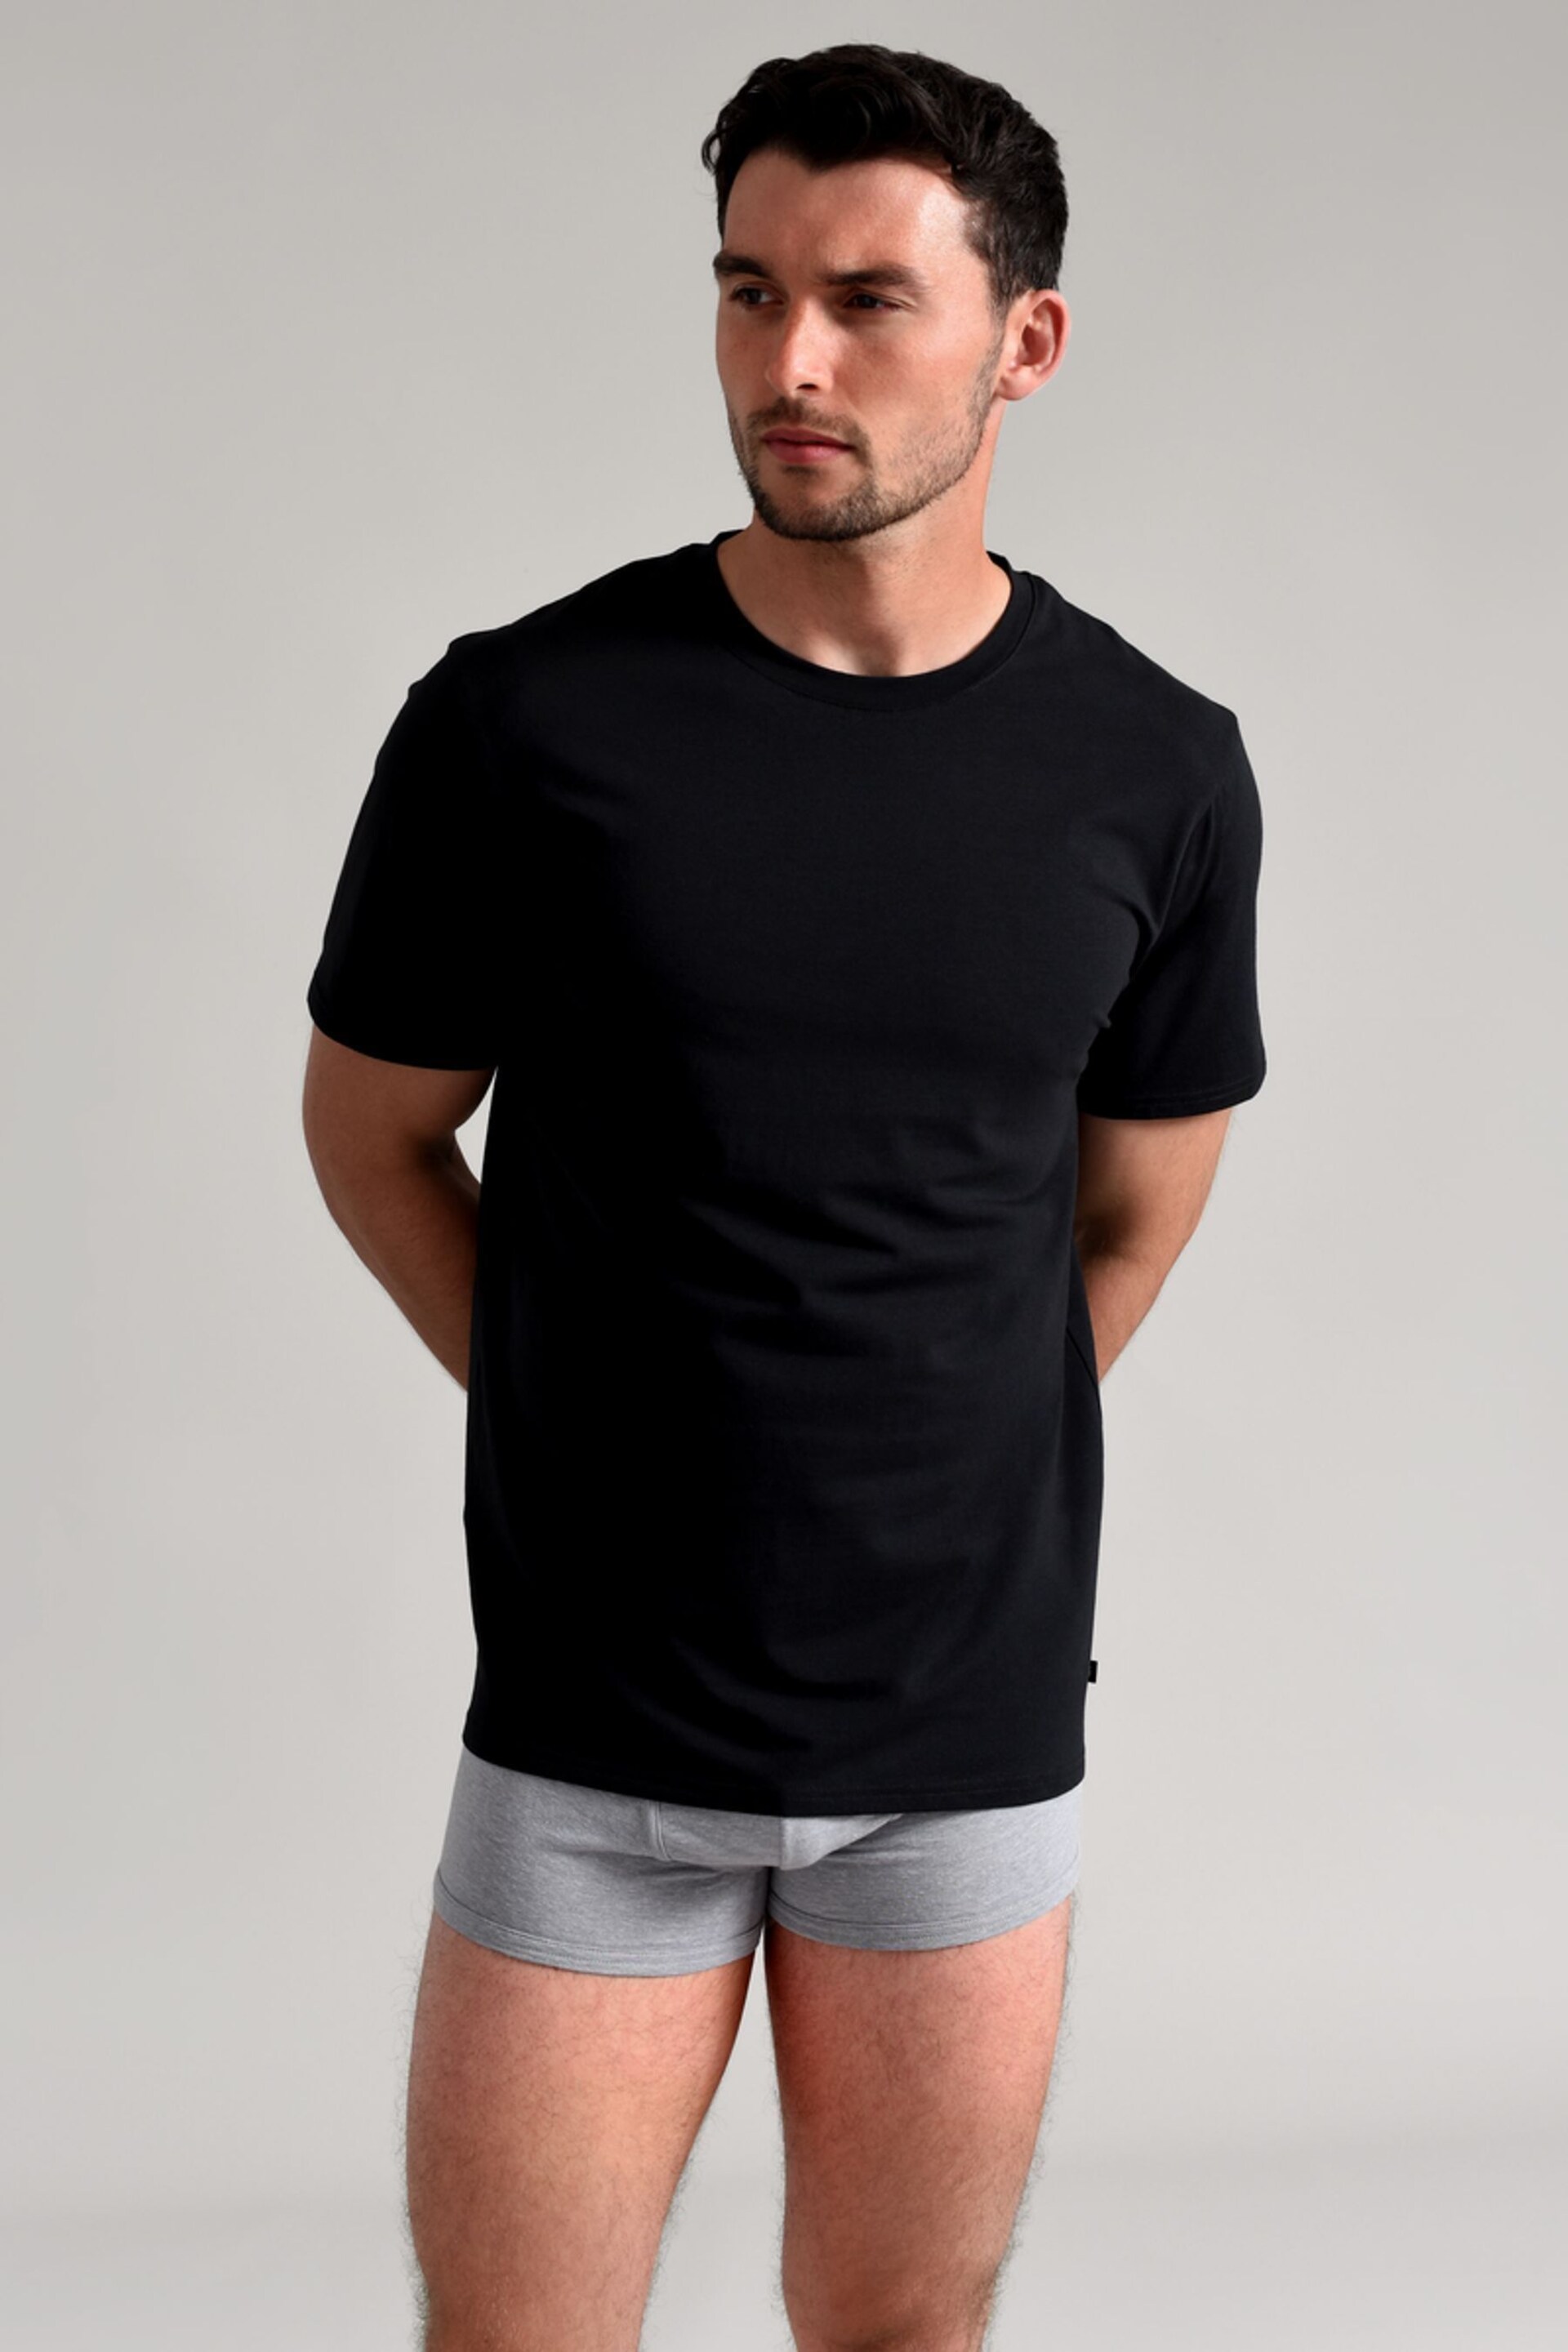 Ted Baker Black Crew Neck T-Shirts 3 Pack - Image 1 of 8